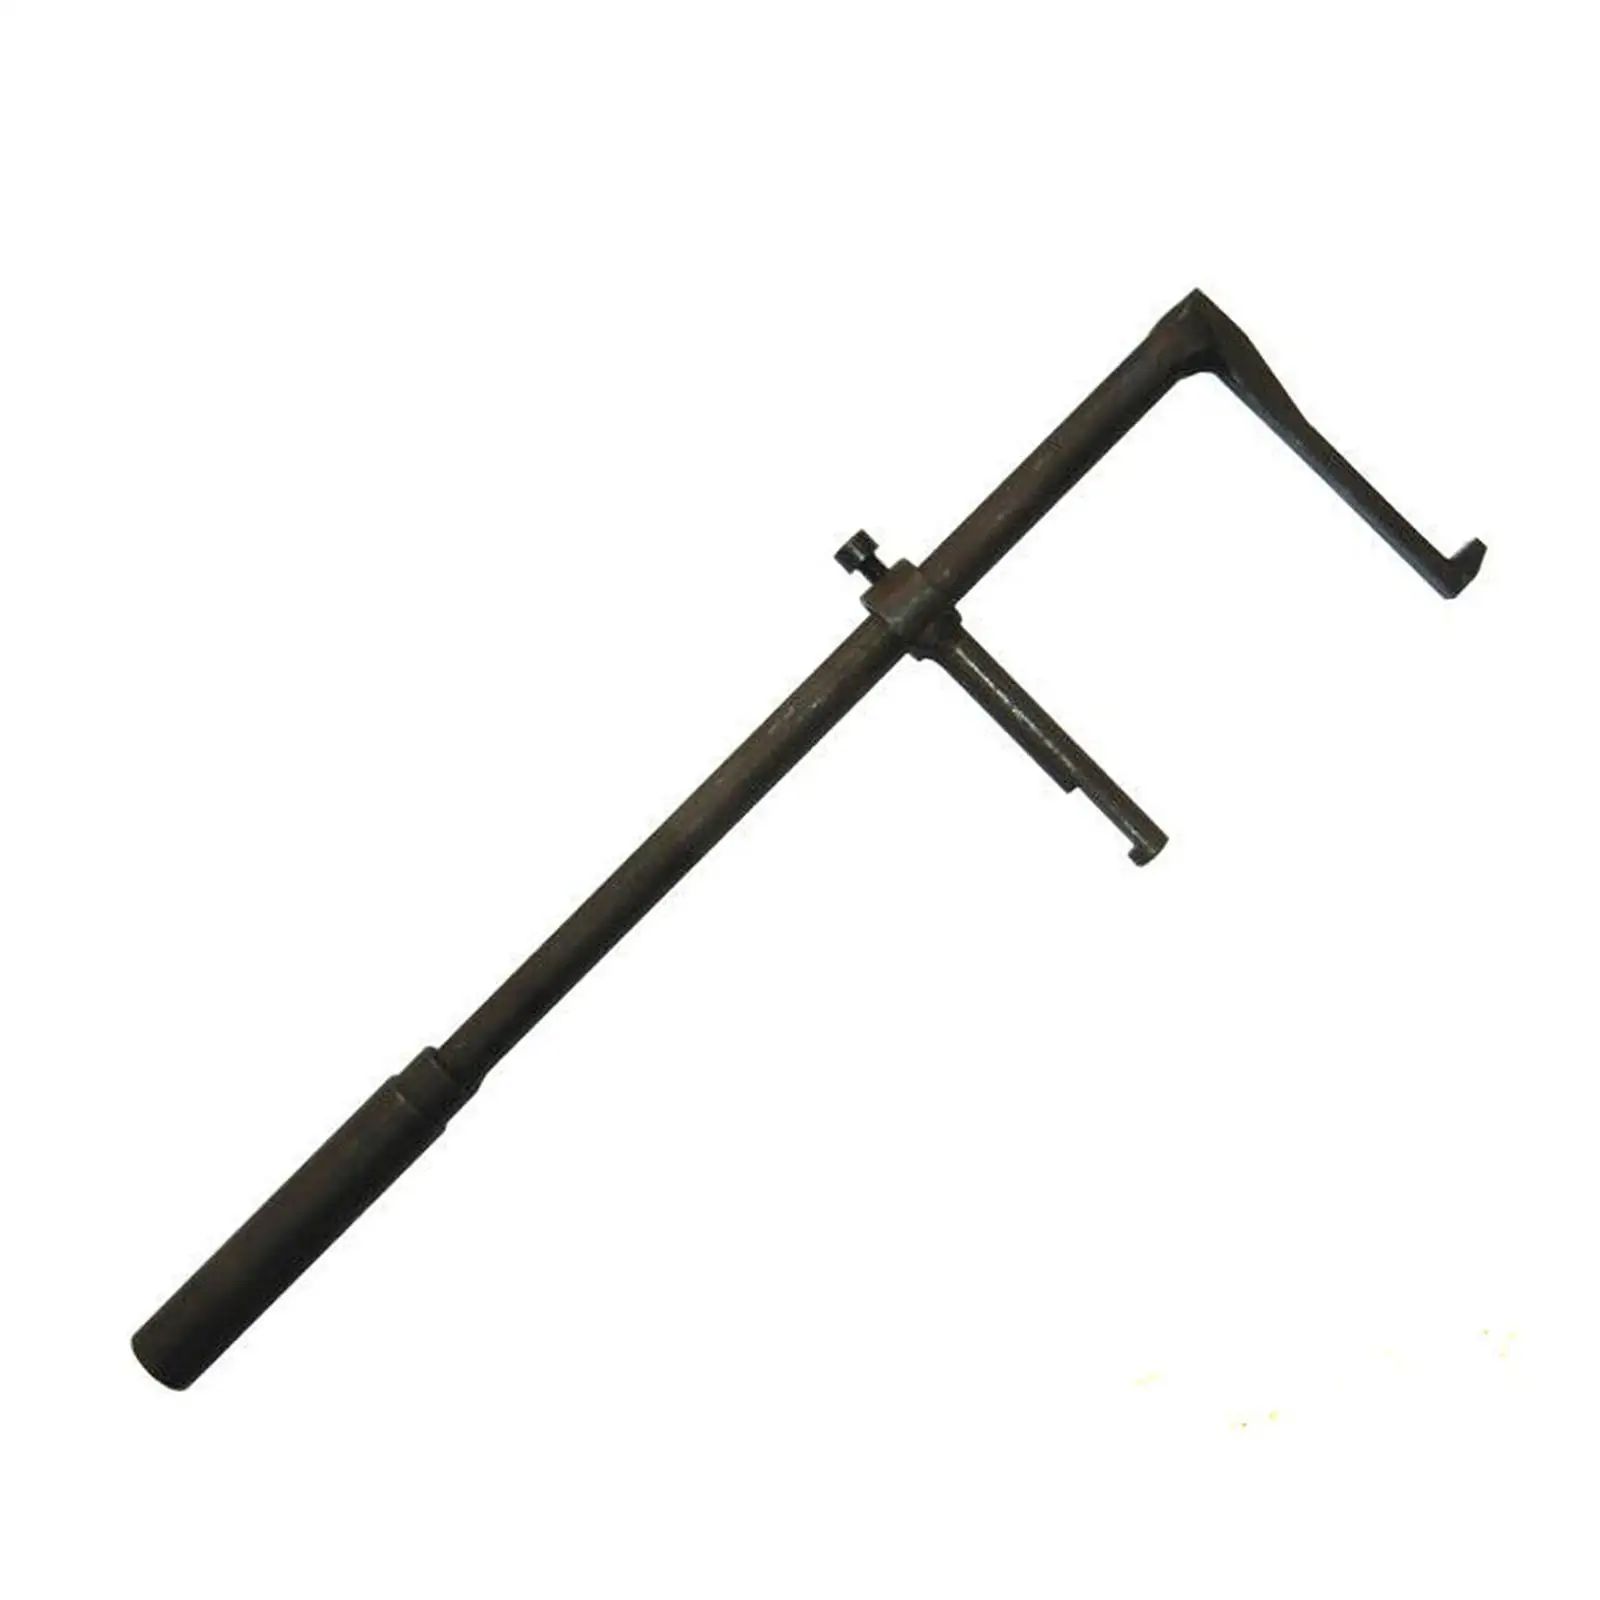 Front Fork Oil Seal Puller Remover, Adjustable, Install Tool, Repair Tool for